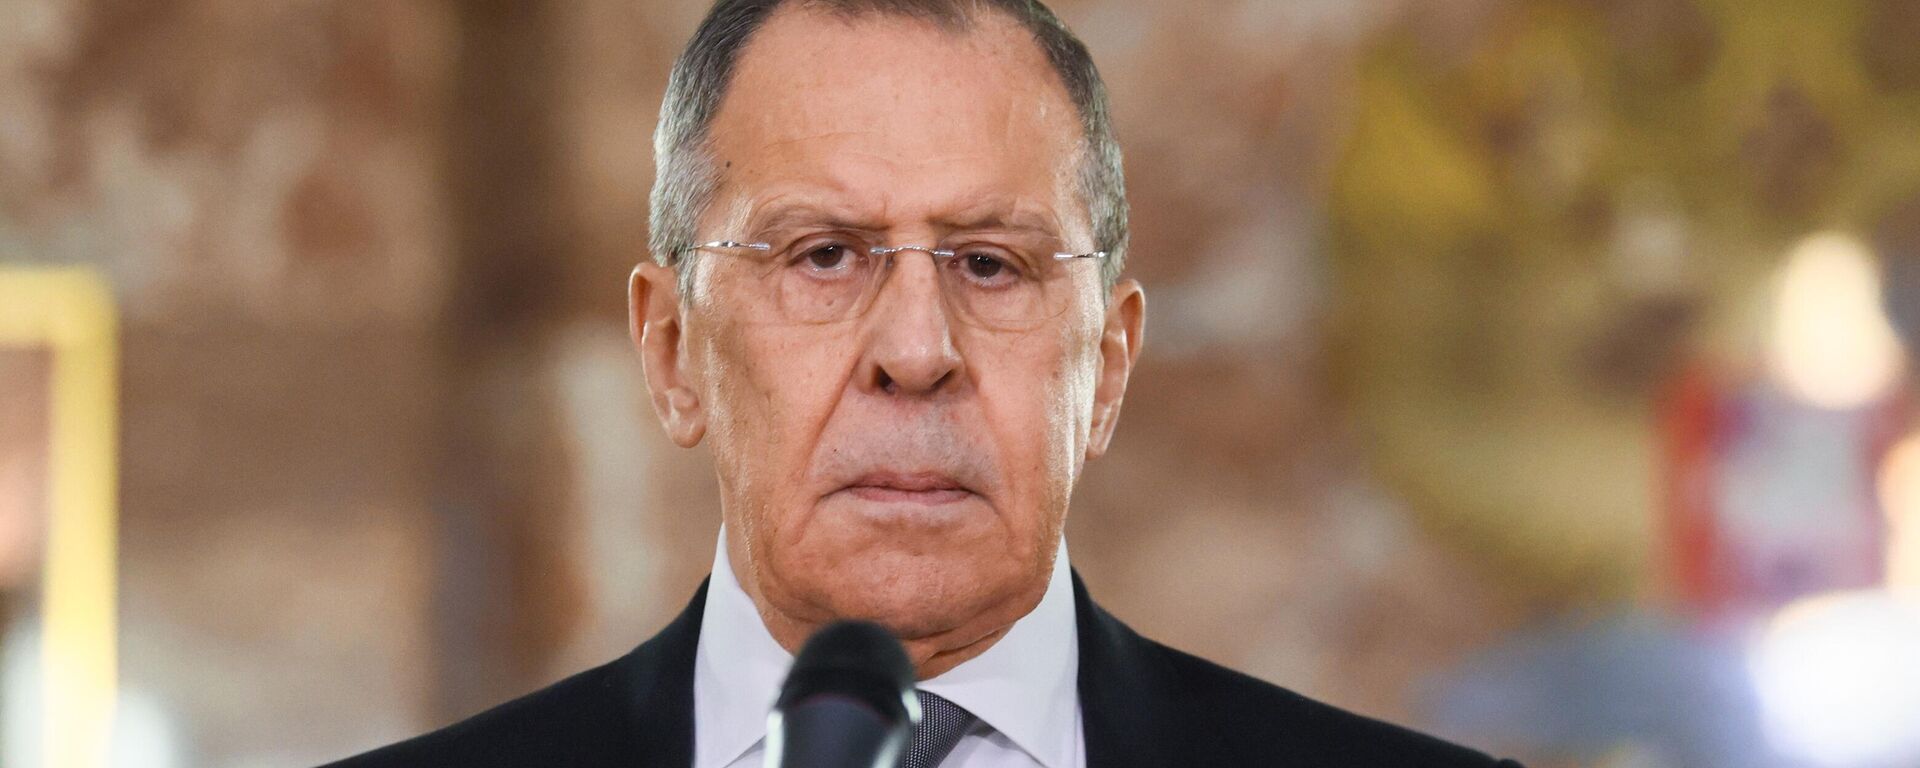 Russian Foreign Minister Sergei Lavrov at a Foreign Ministry ceremony in Moscow on February 10, 2023. - Sputnik International, 1920, 03.03.2023